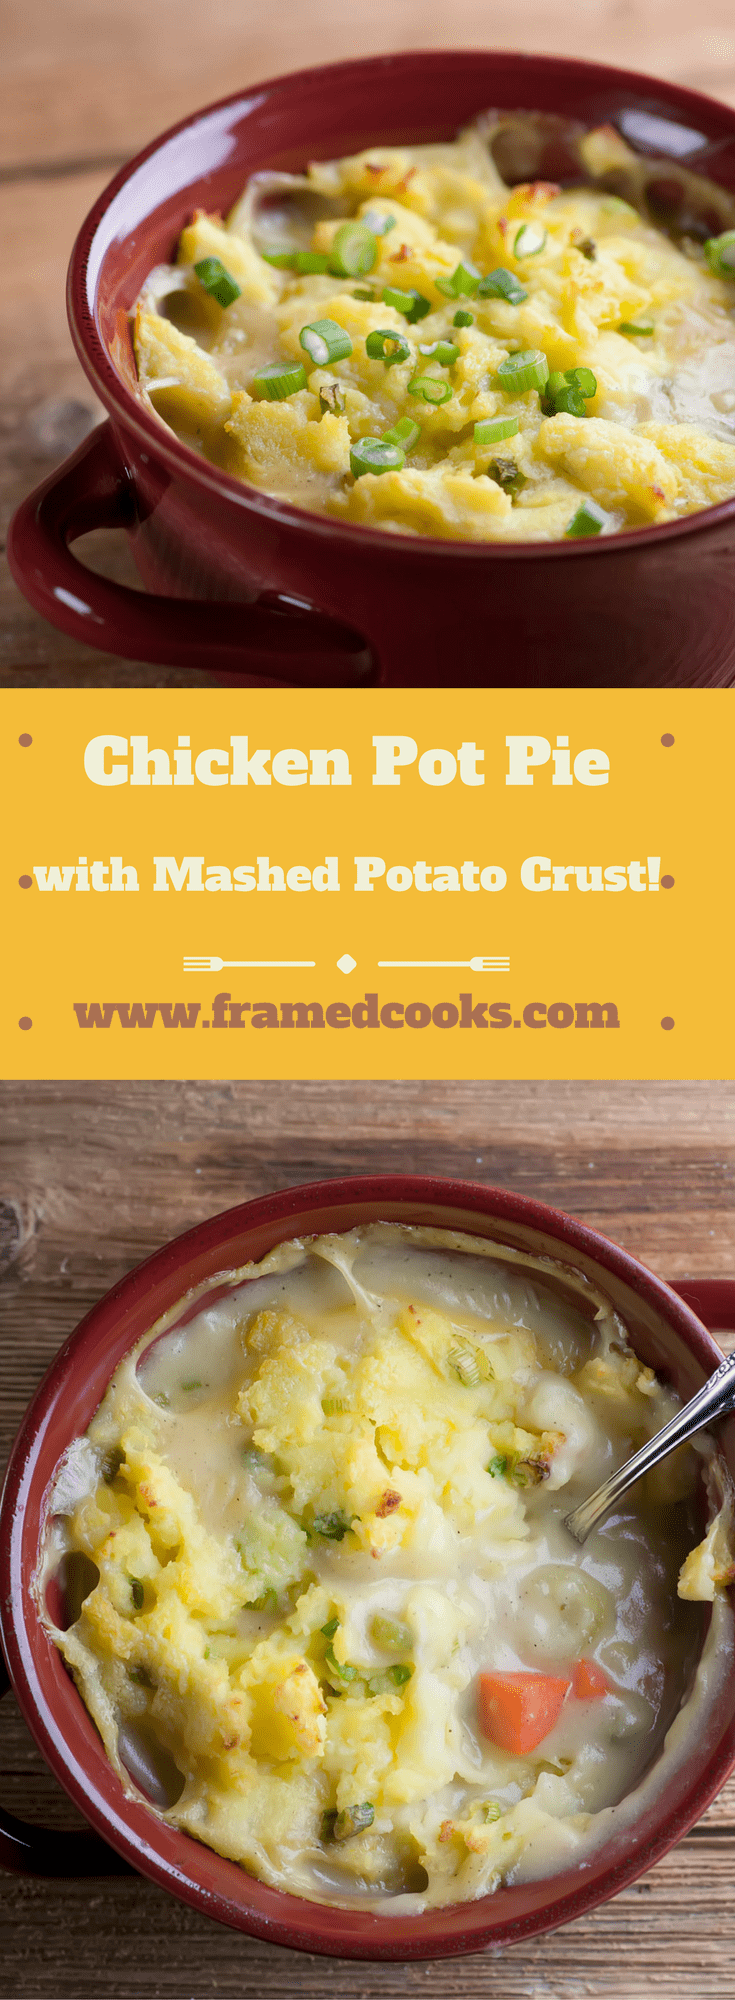 Chicken Pot Pie with Mashed Potato Crust - Framed Cooks